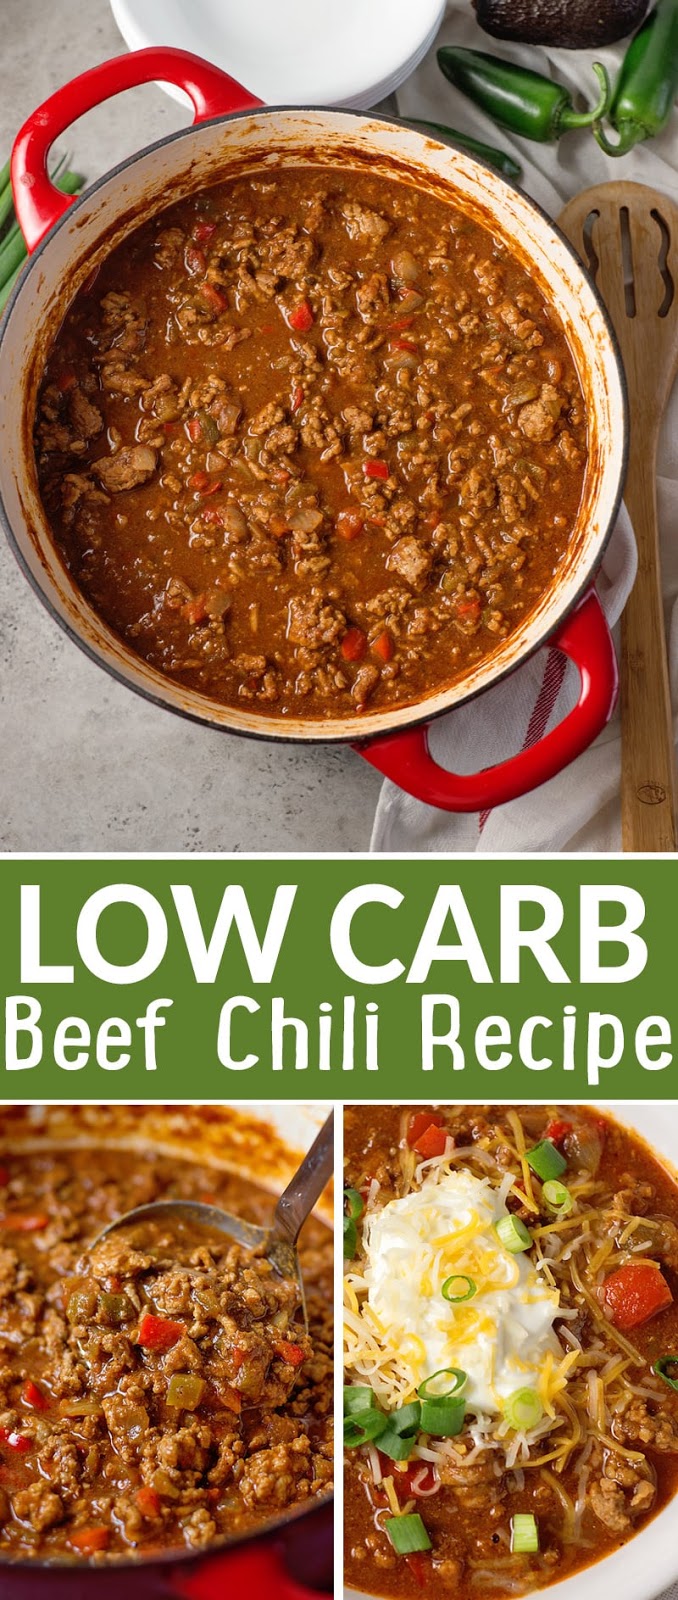 Low Carb Beef Chili Recipe by , Low Carb Recipes 2017-1-6